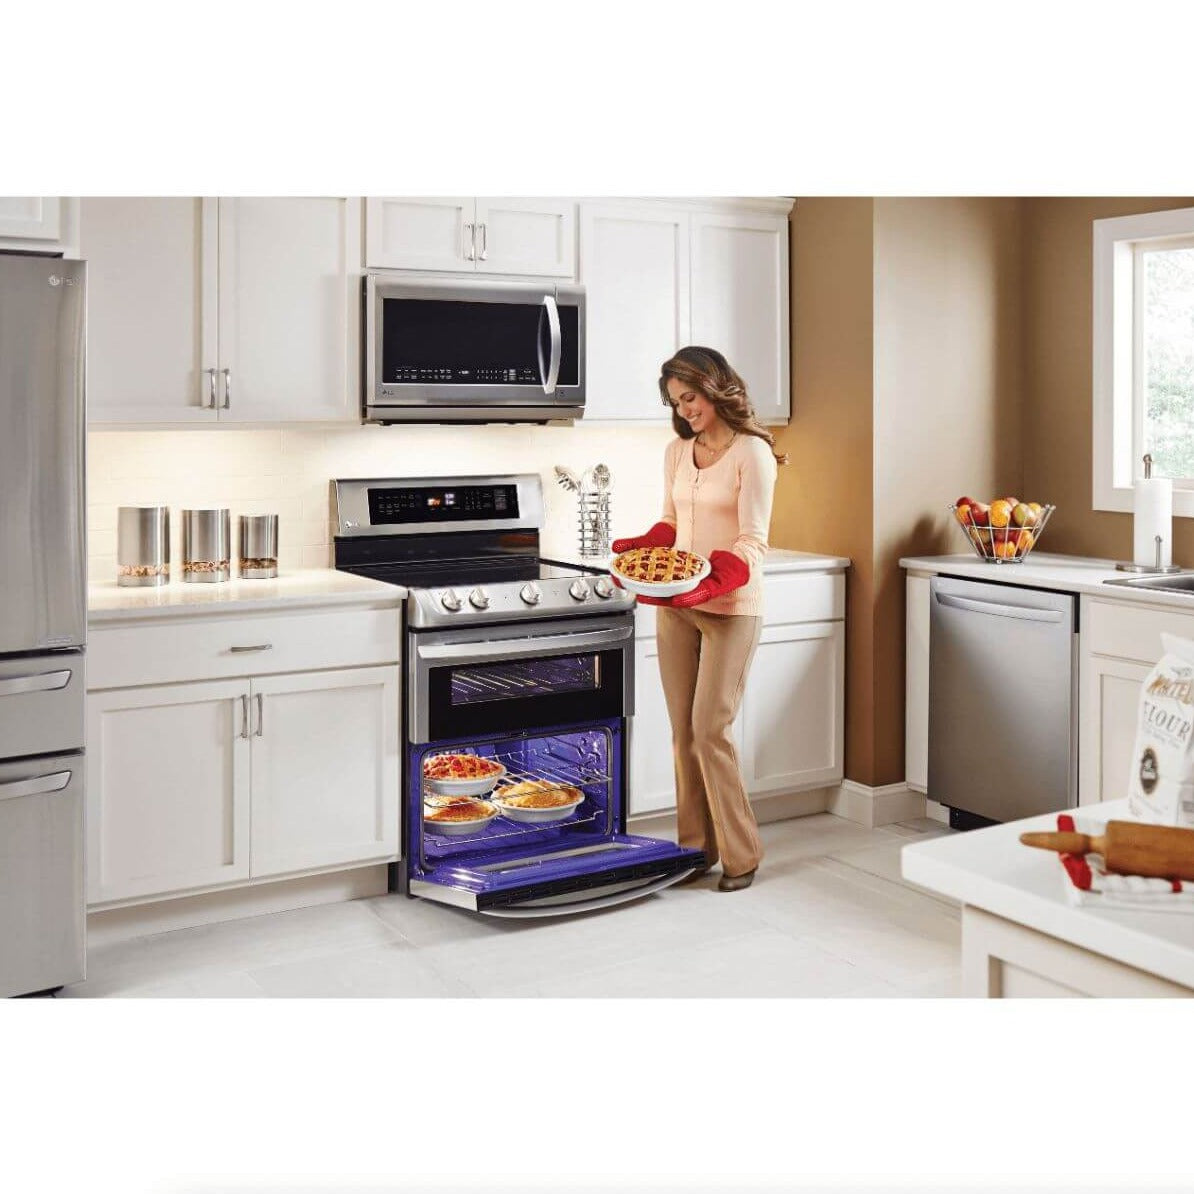 LG 30 Inch Freestanding Electric Range with Double Oven in Stainless Steel 7.3 Cu.Ft. (LDE4413ST)